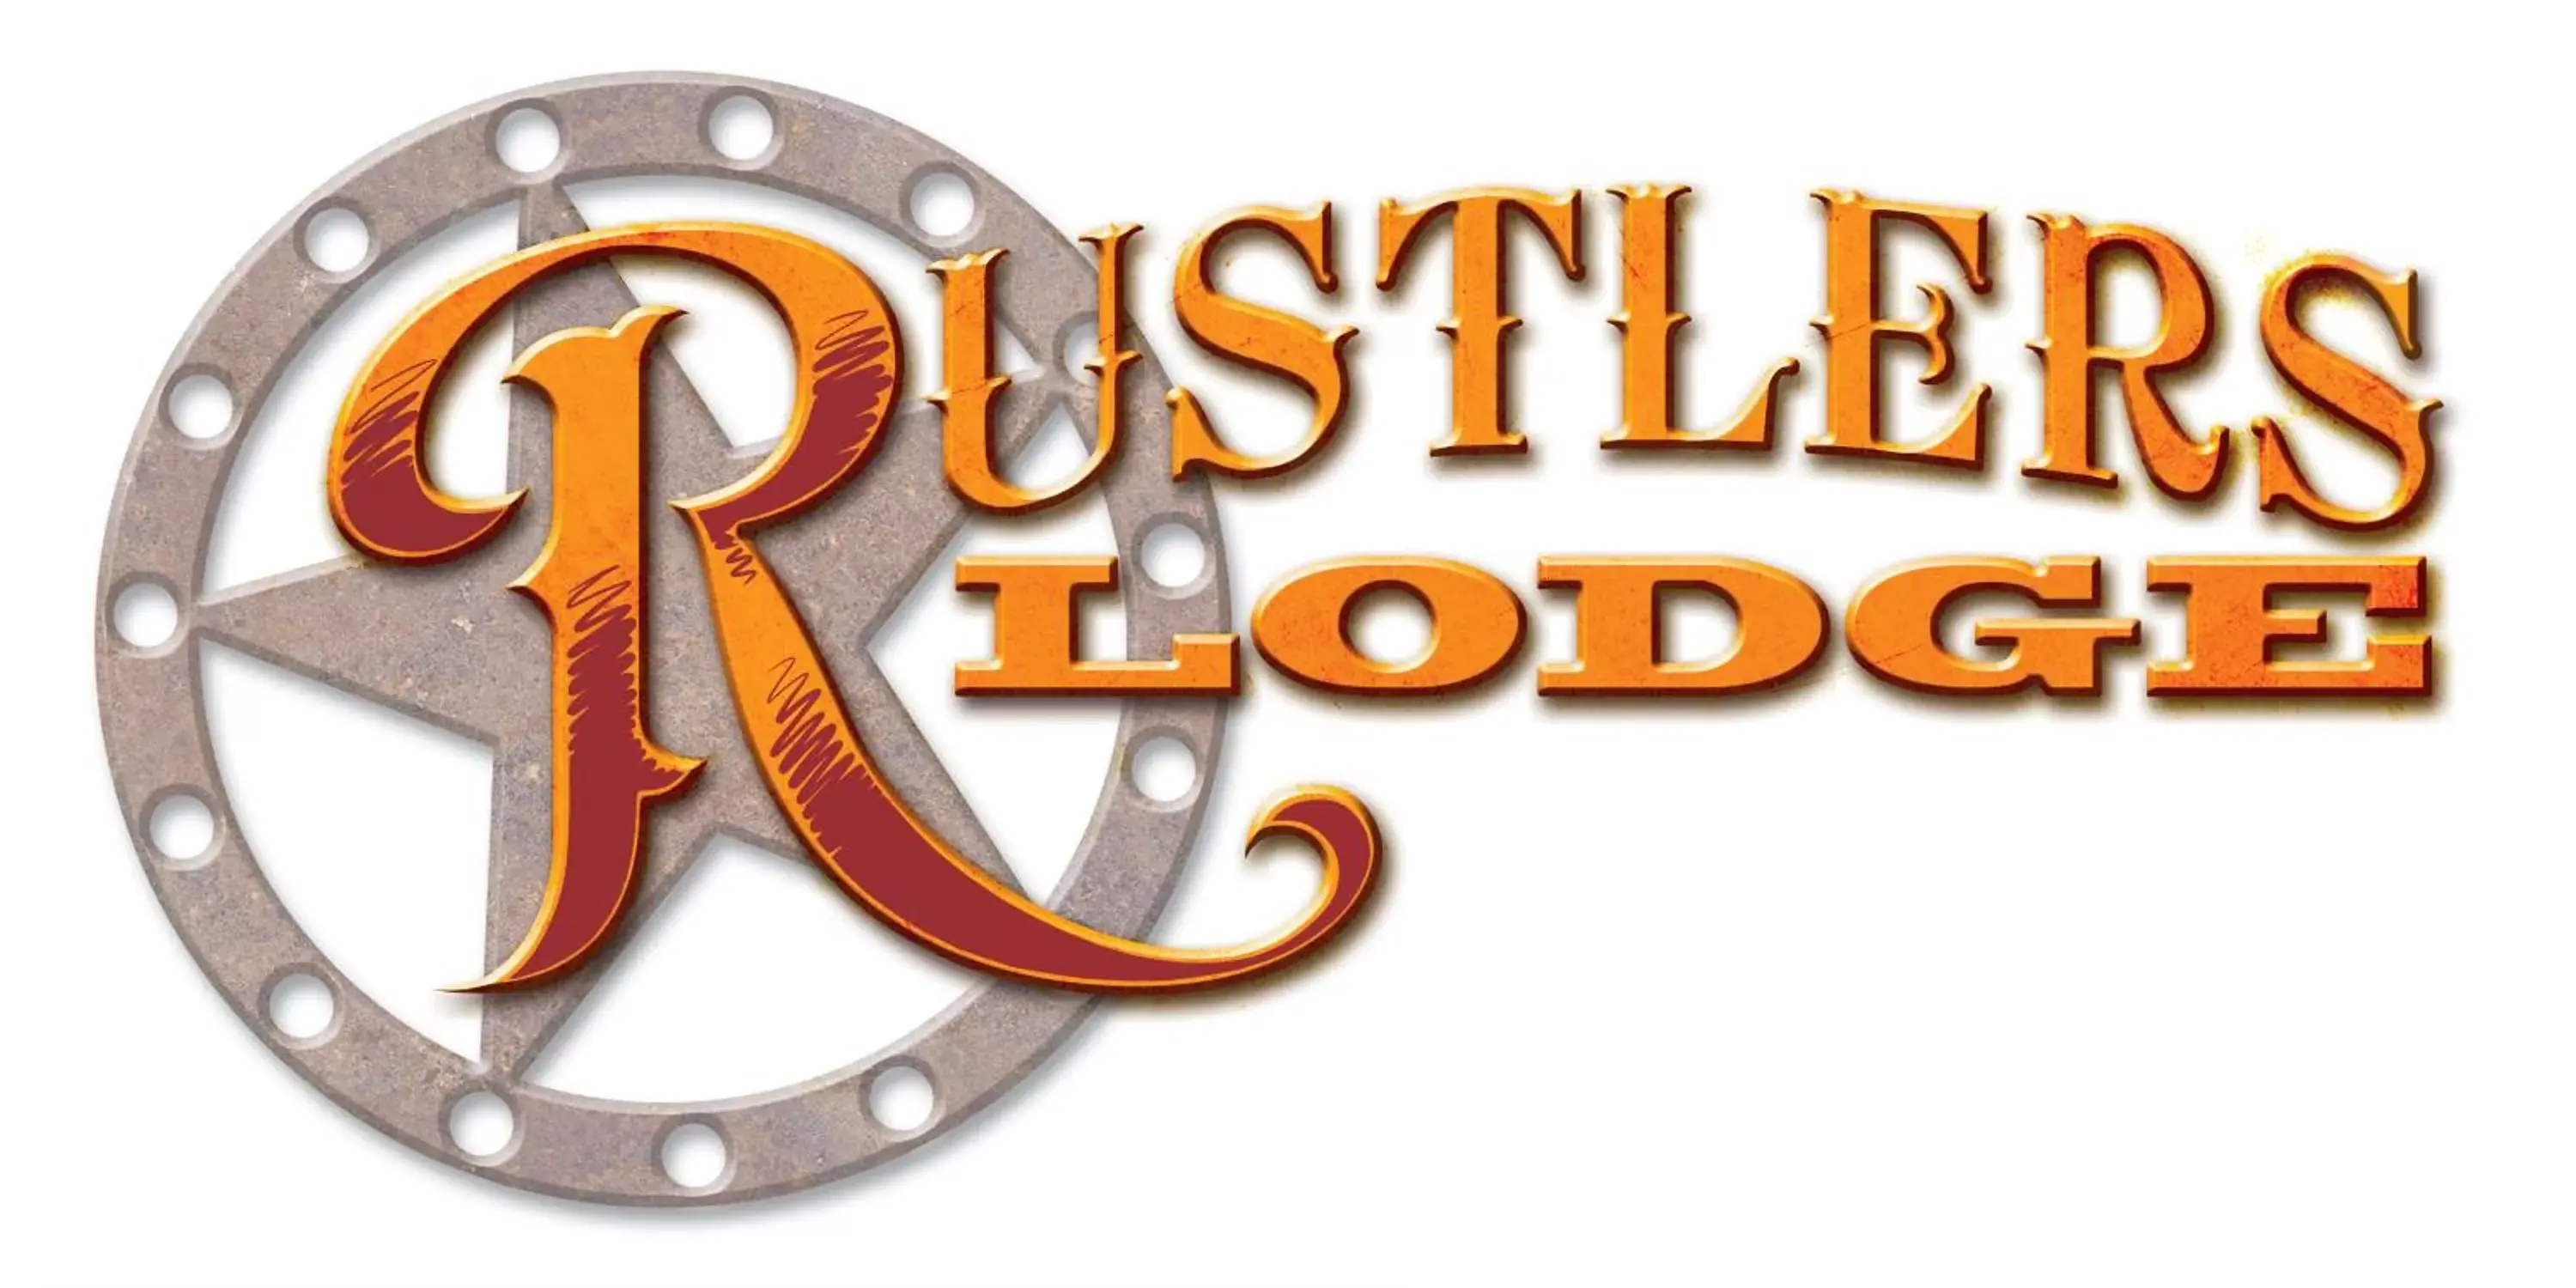 Property logo or sign in Rustlers Lodge